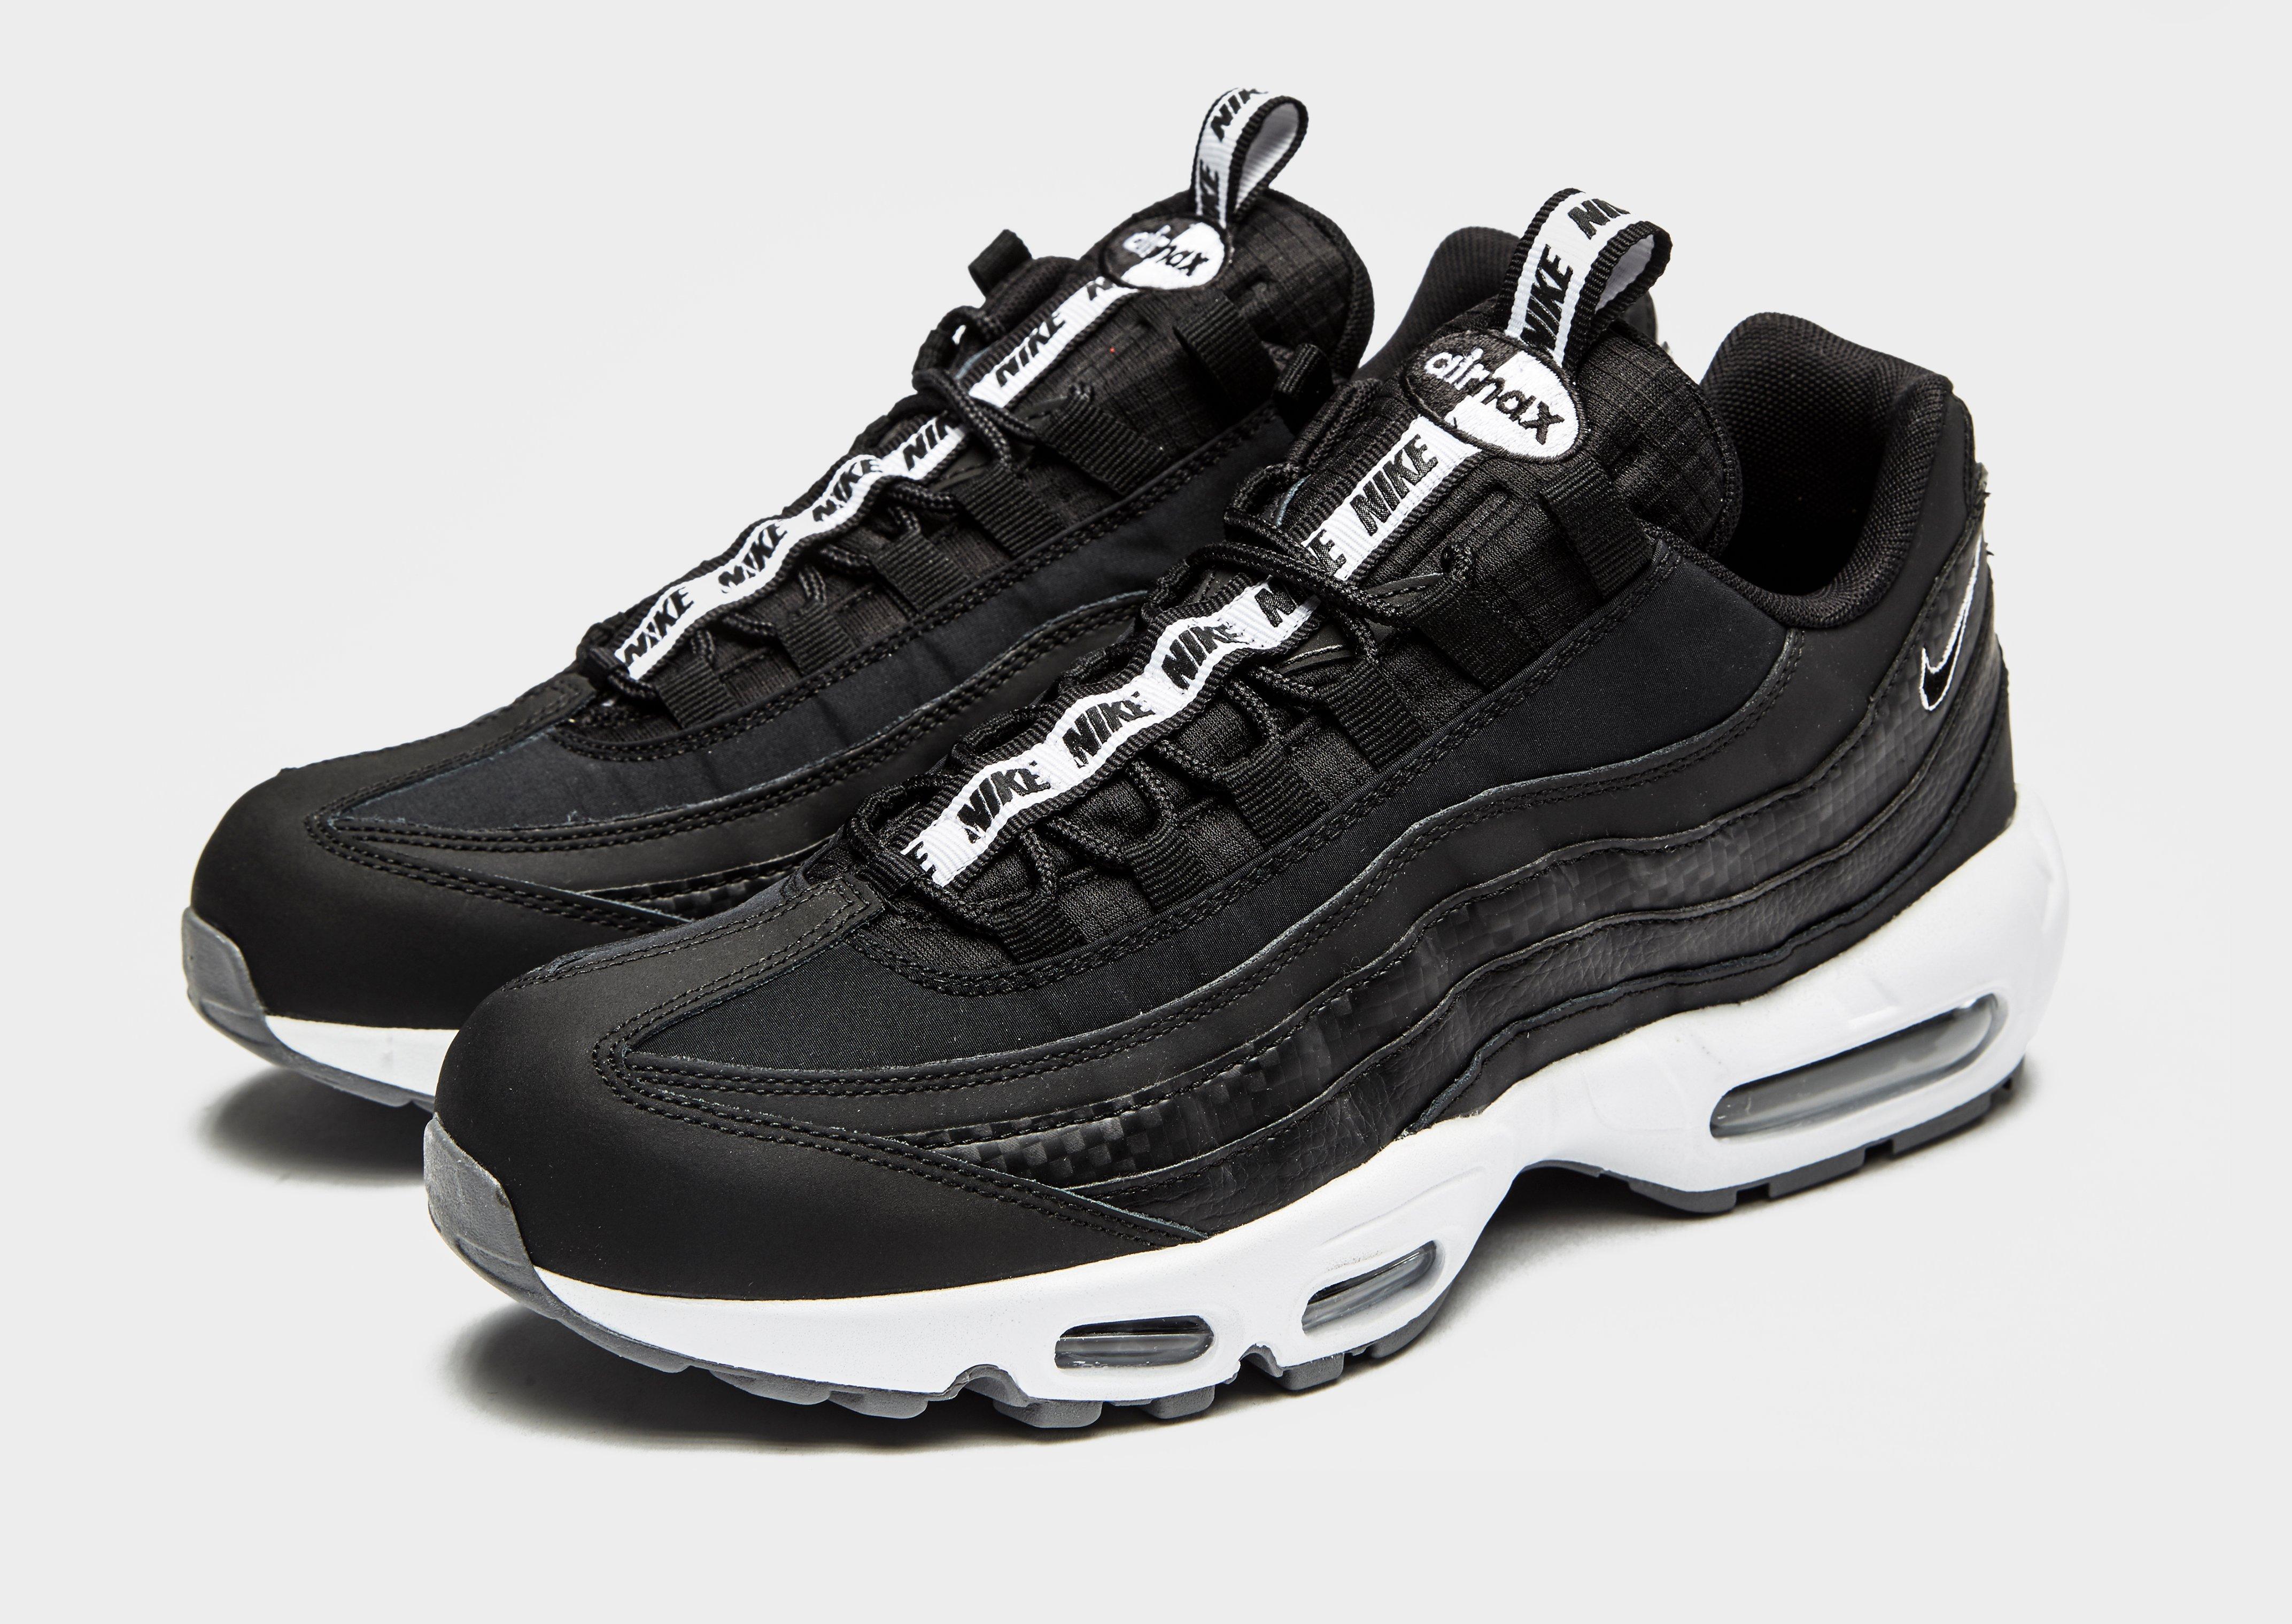 Nike Leather Air Max 95 'taped' in 